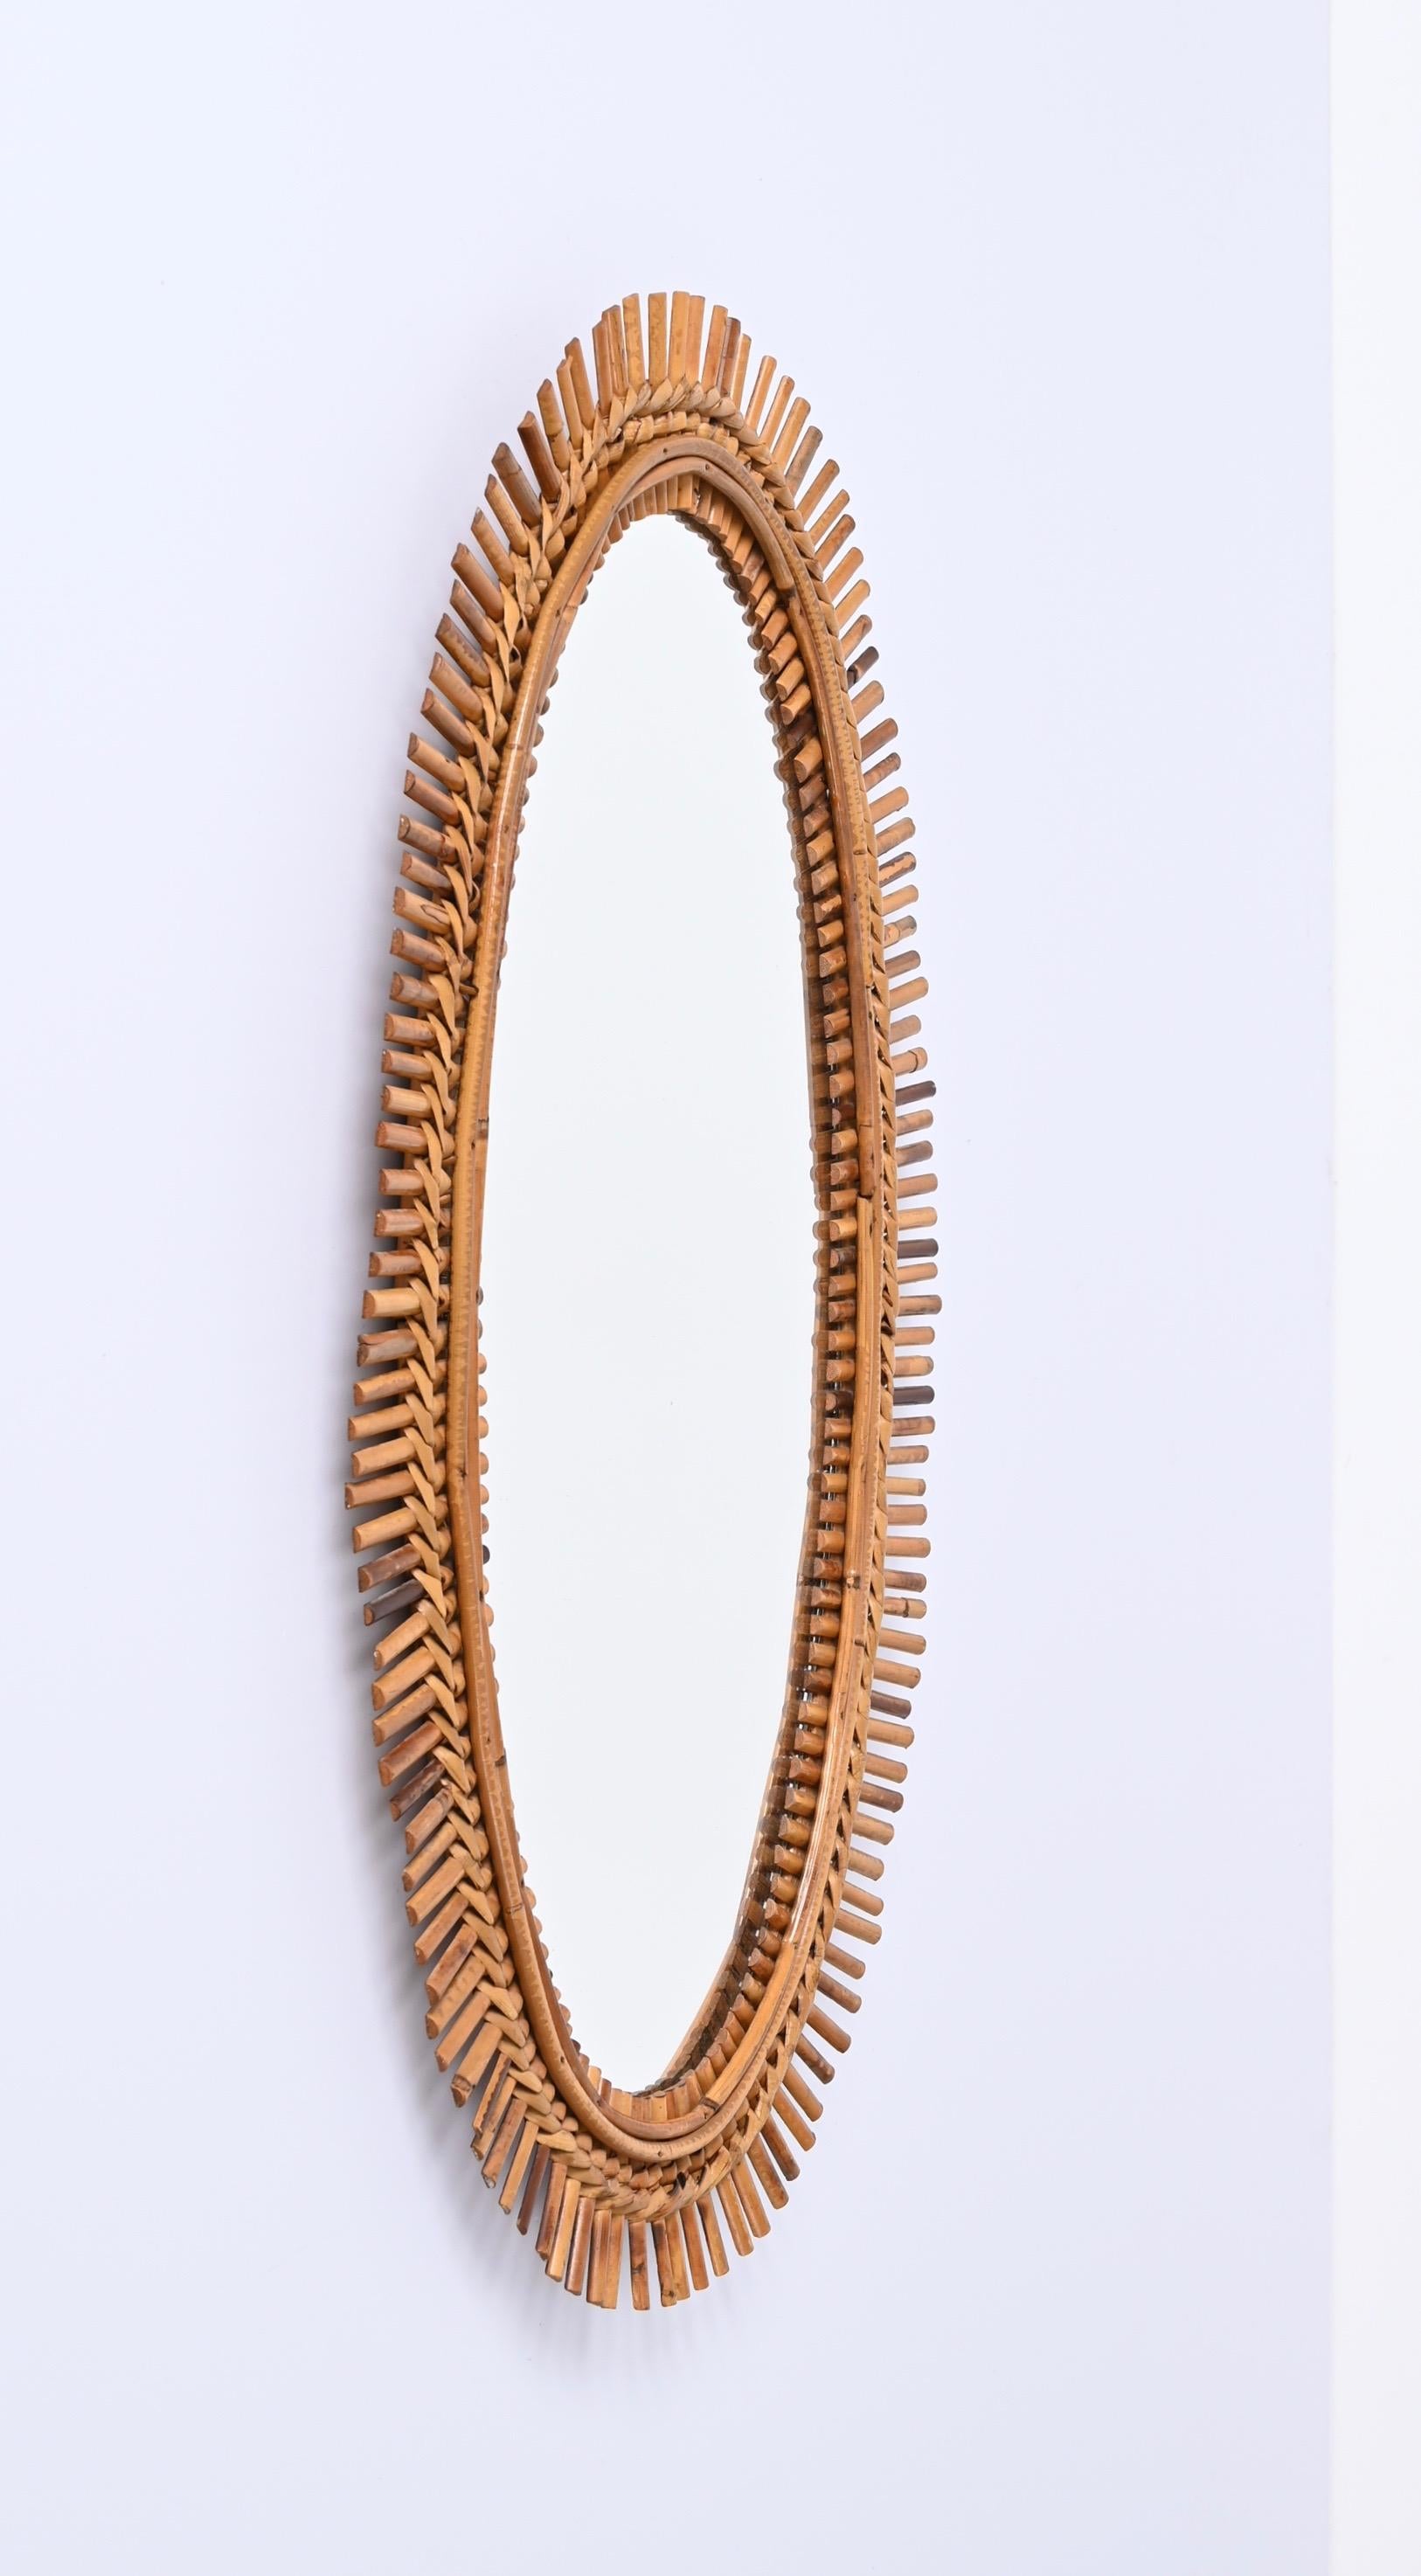 Cote d'Azur oval wall mirror in bamboo, rattan and wicker, made in France in the 1960s. It is attributed to the mastery of Franco Albini.

This fantastic mirror features a double frame in rattan crossed by small bamboo inserts, the whole is kept